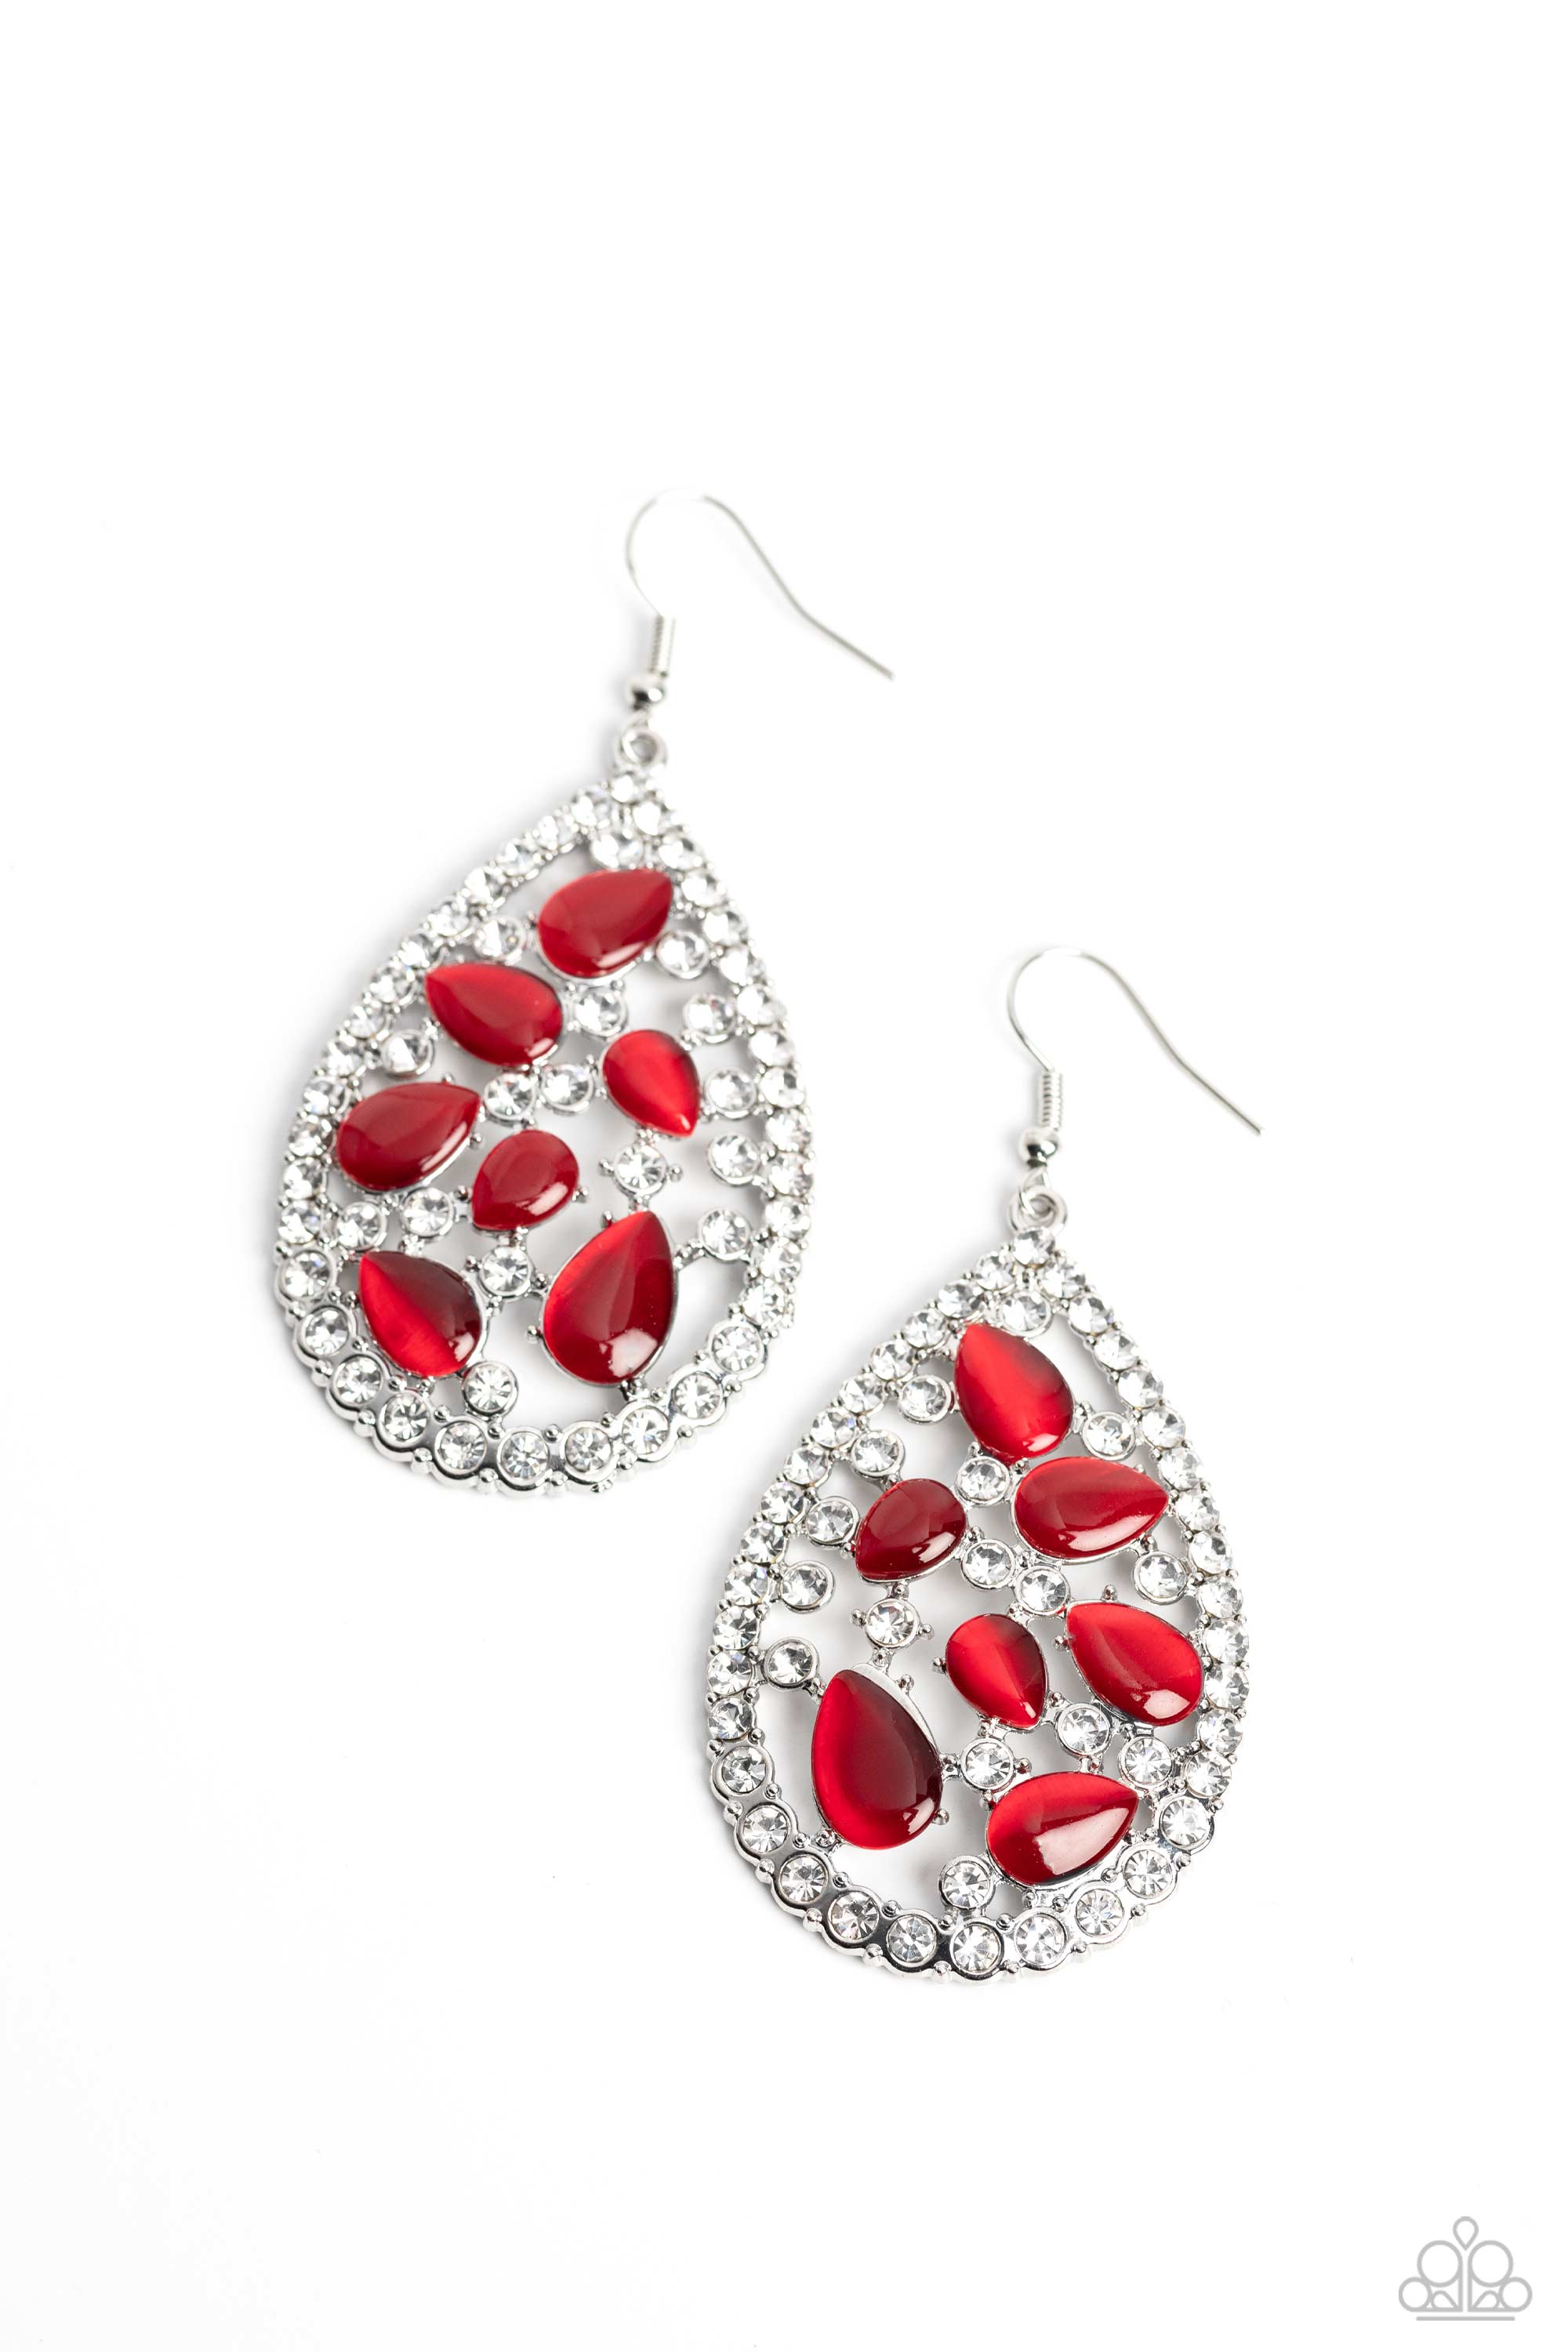 Cats Eye Class Red Earrings - Paparazzi Accessories- lightbox - CarasShop.com - $5 Jewelry by Cara Jewels